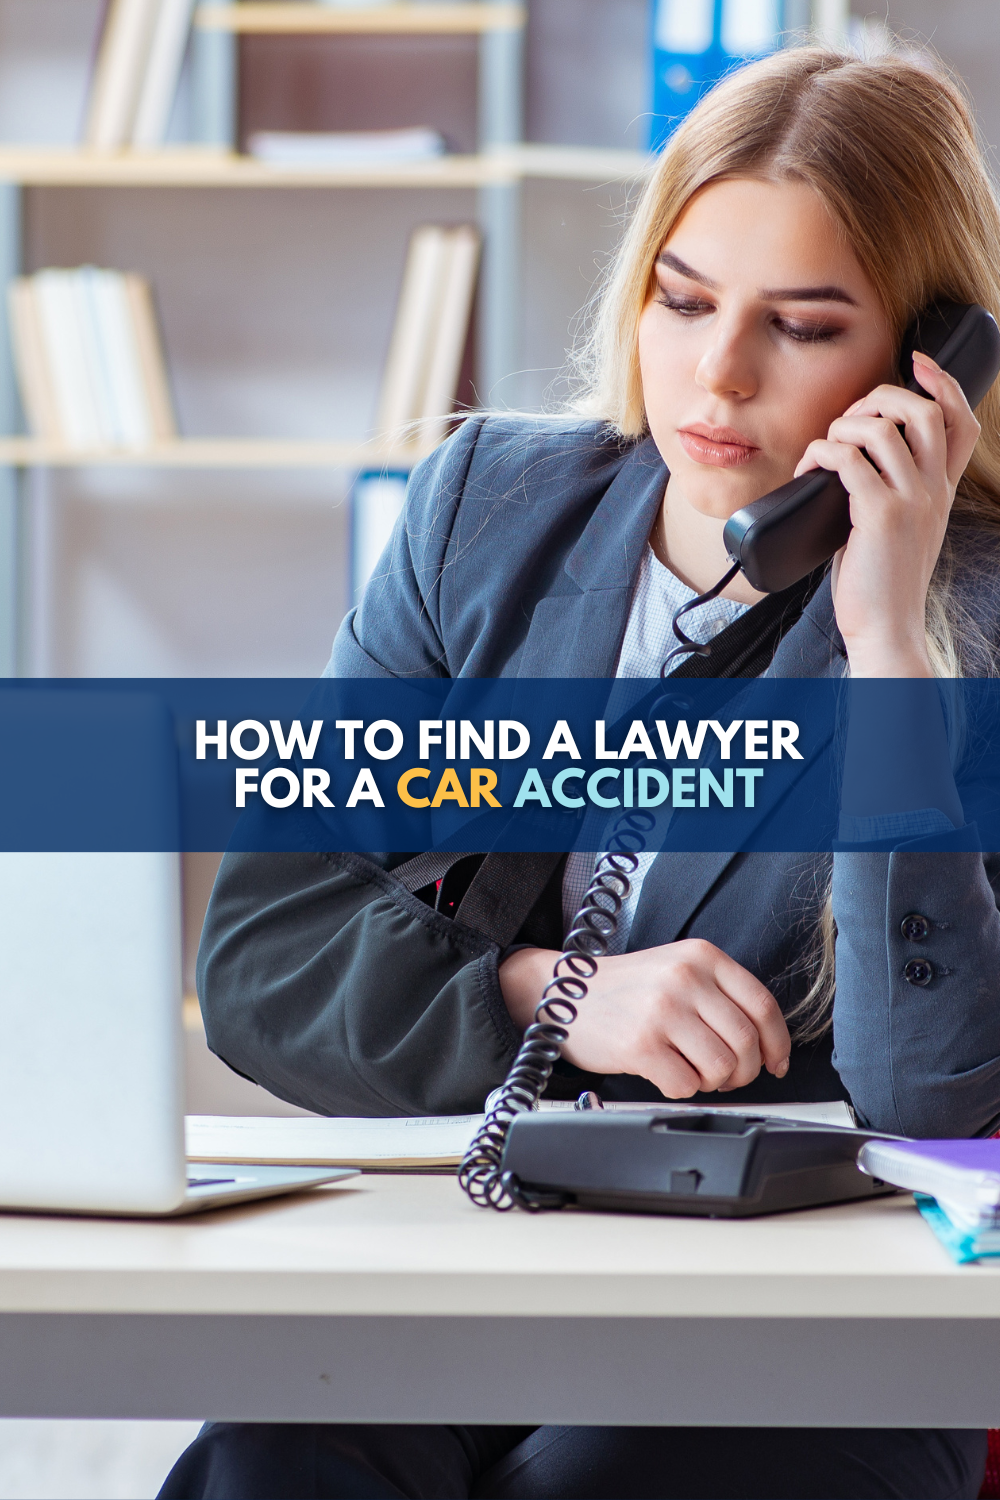 How To Find A Lawyer For A Car Accident In Michigan: 4 Distinct Qualities Revealed